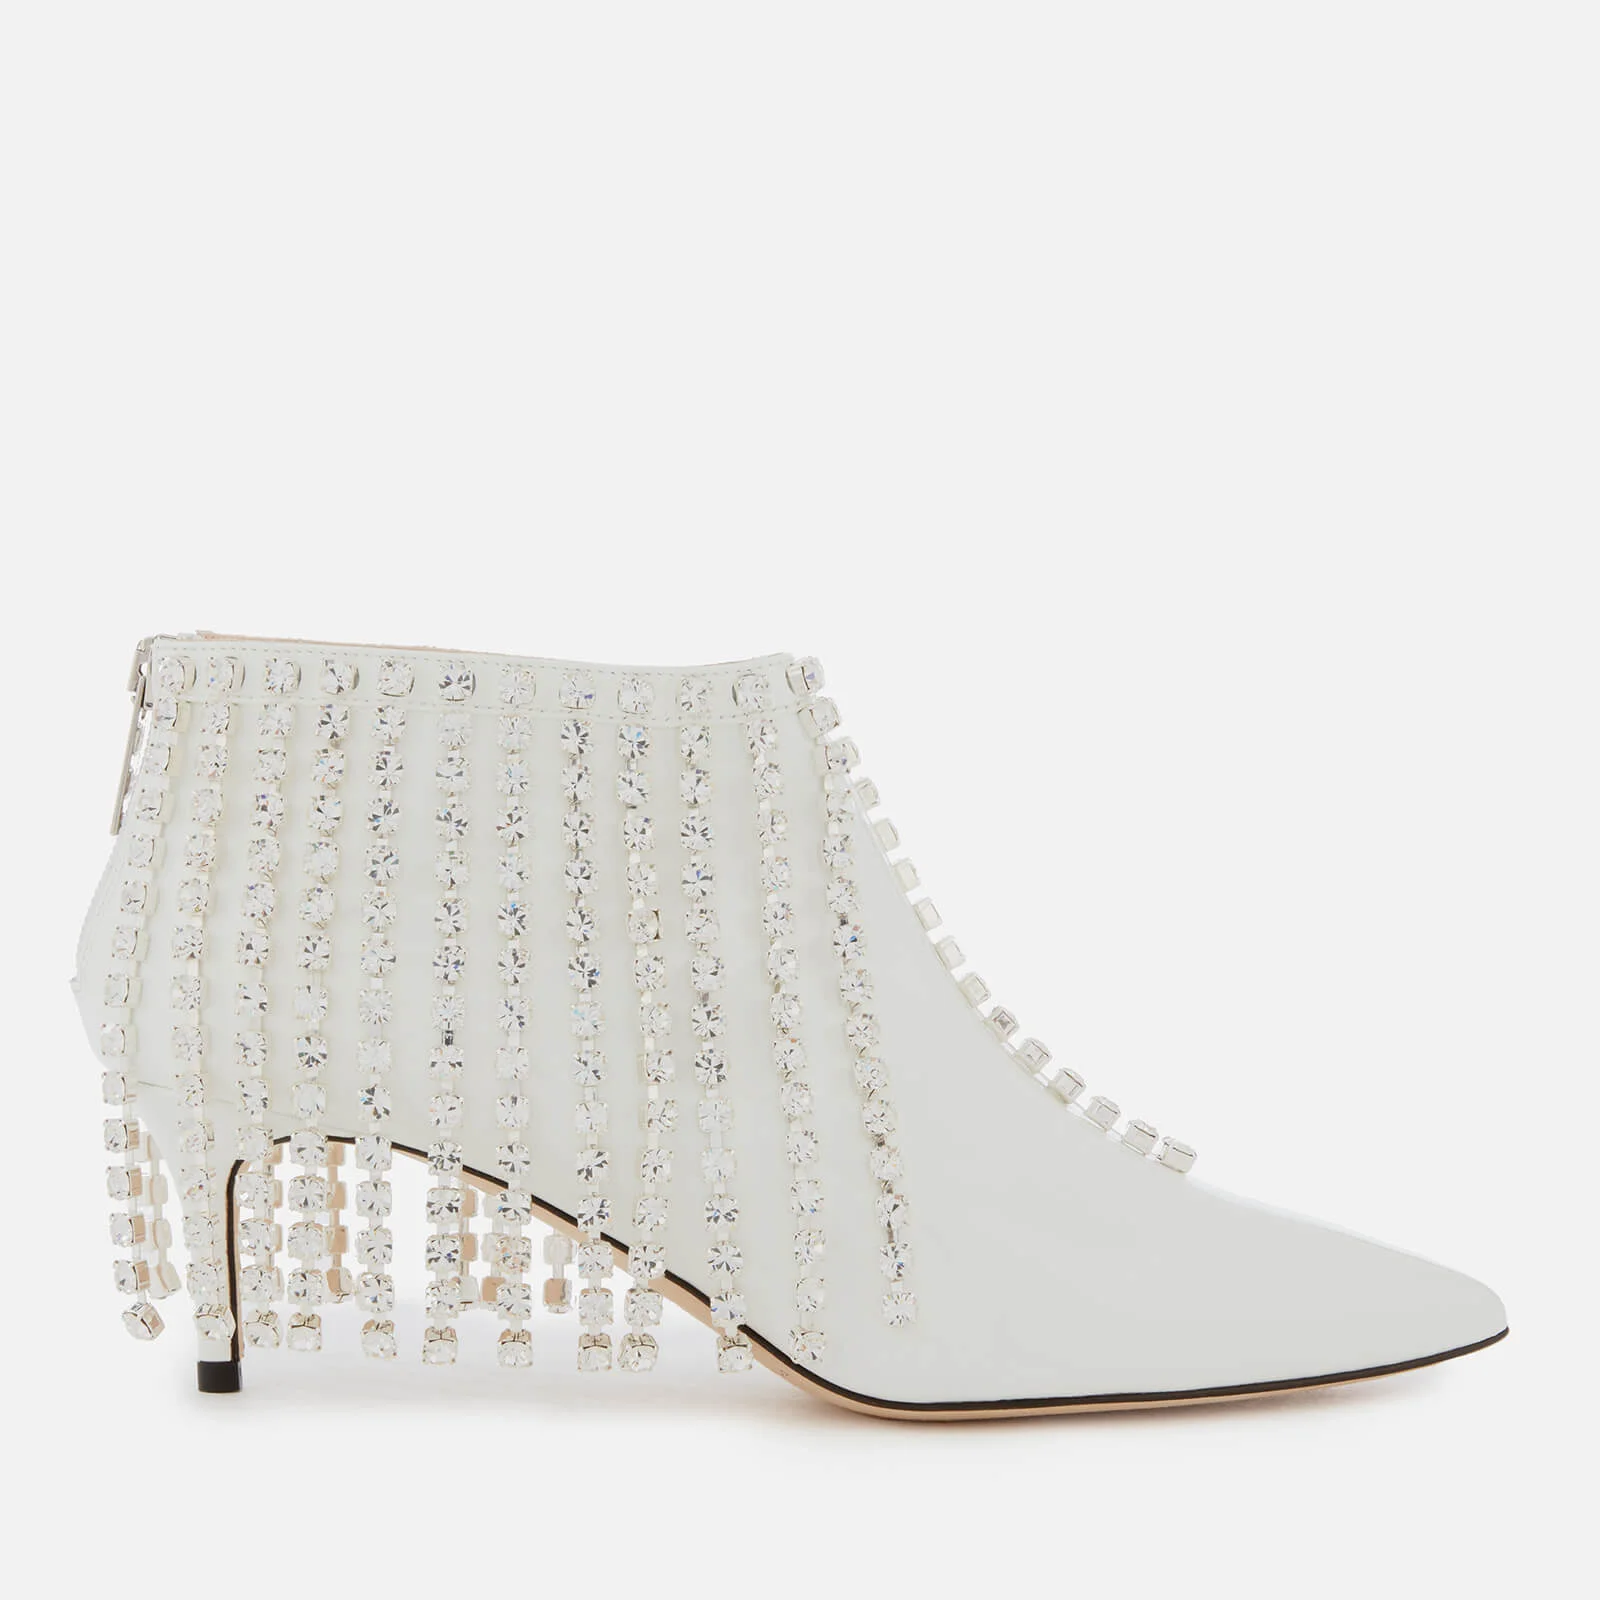 Christopher Kane Women's Crystal Fringed Ankle Boots - White Image 1